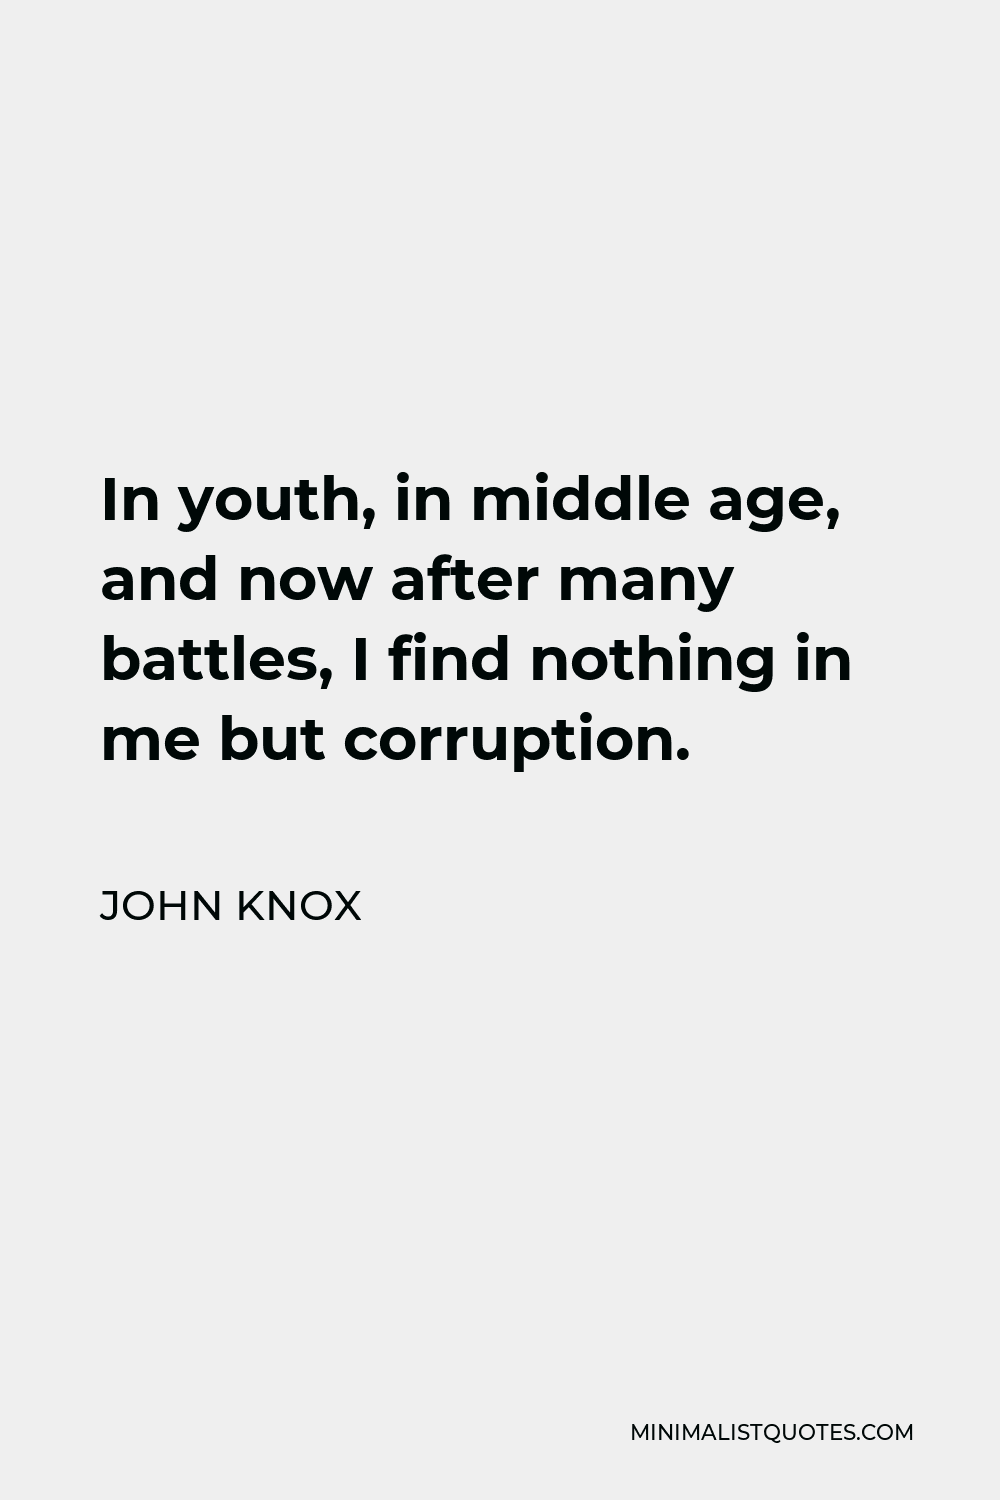 John Knox Quote - In youth, in middle age, and now after many battles, I find nothing in me but corruption.